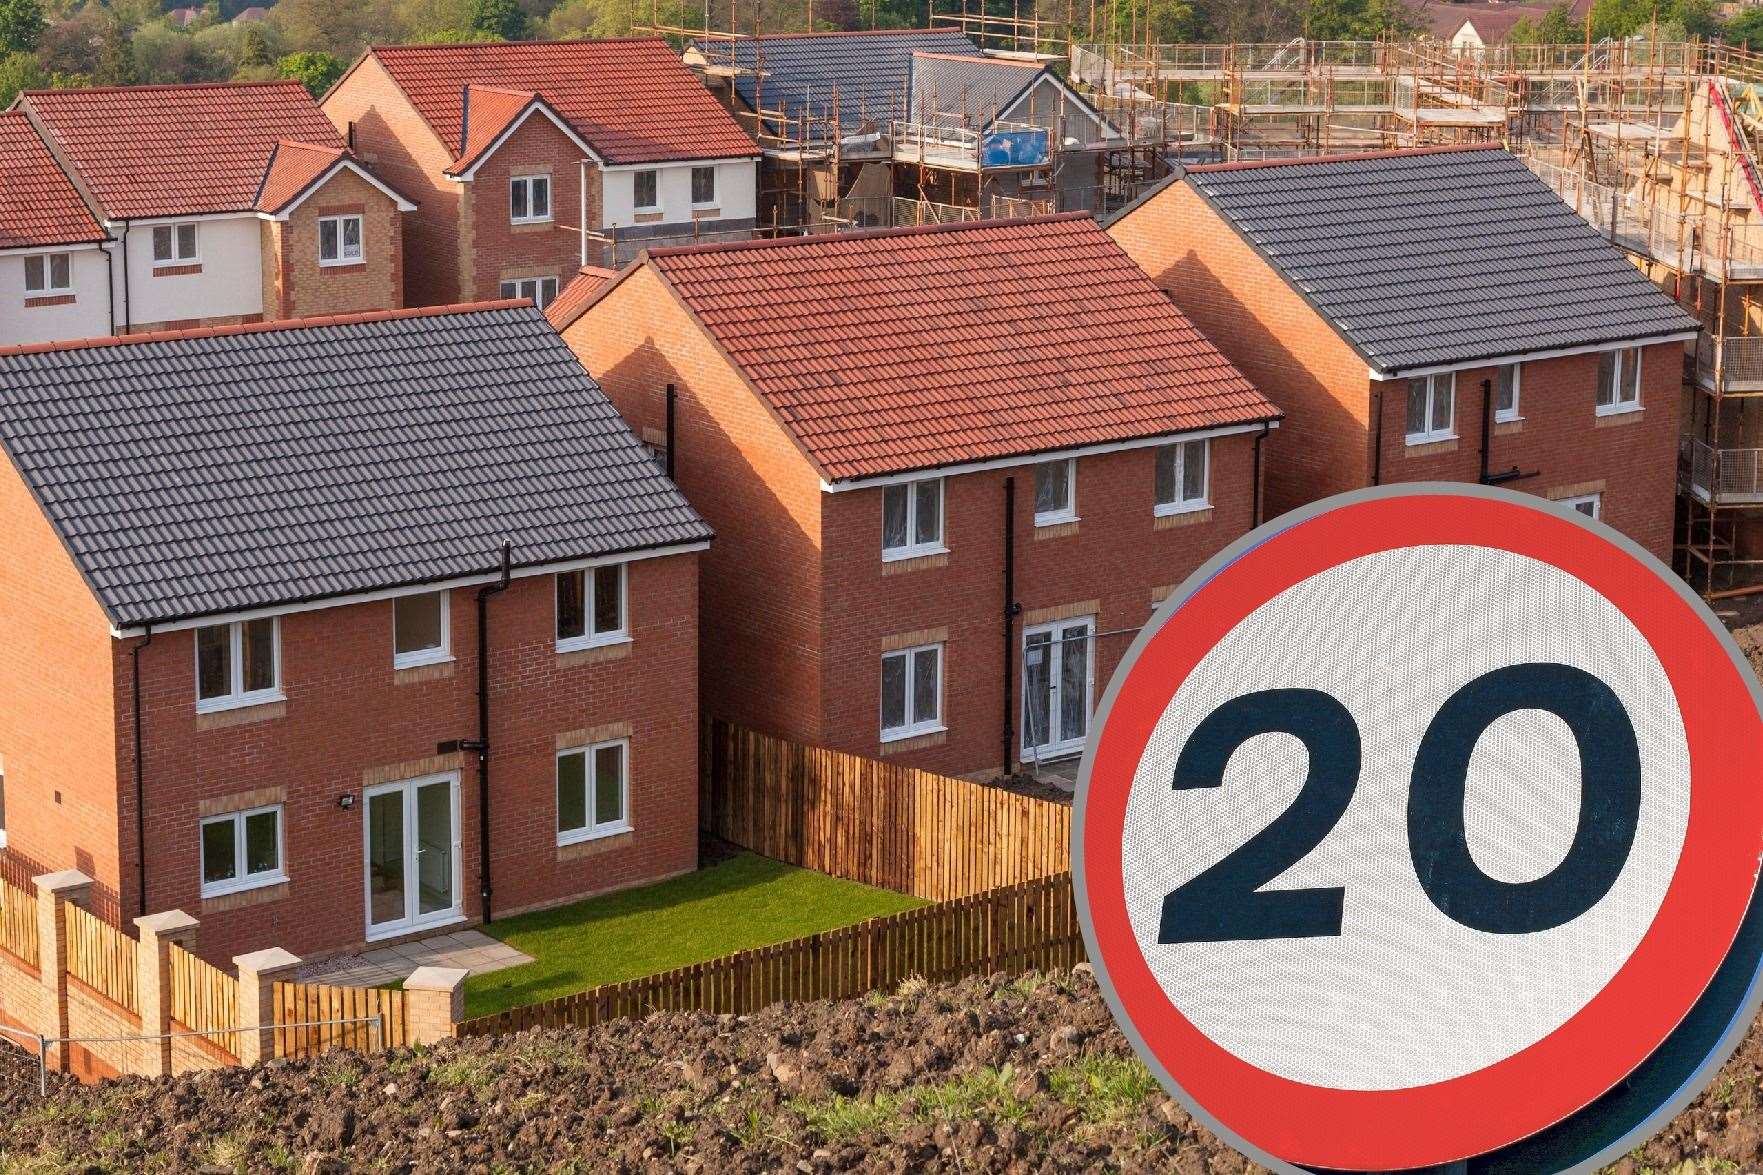 Kent County Council has been urged to insist that 20mph limits be imposed at all new housing developments